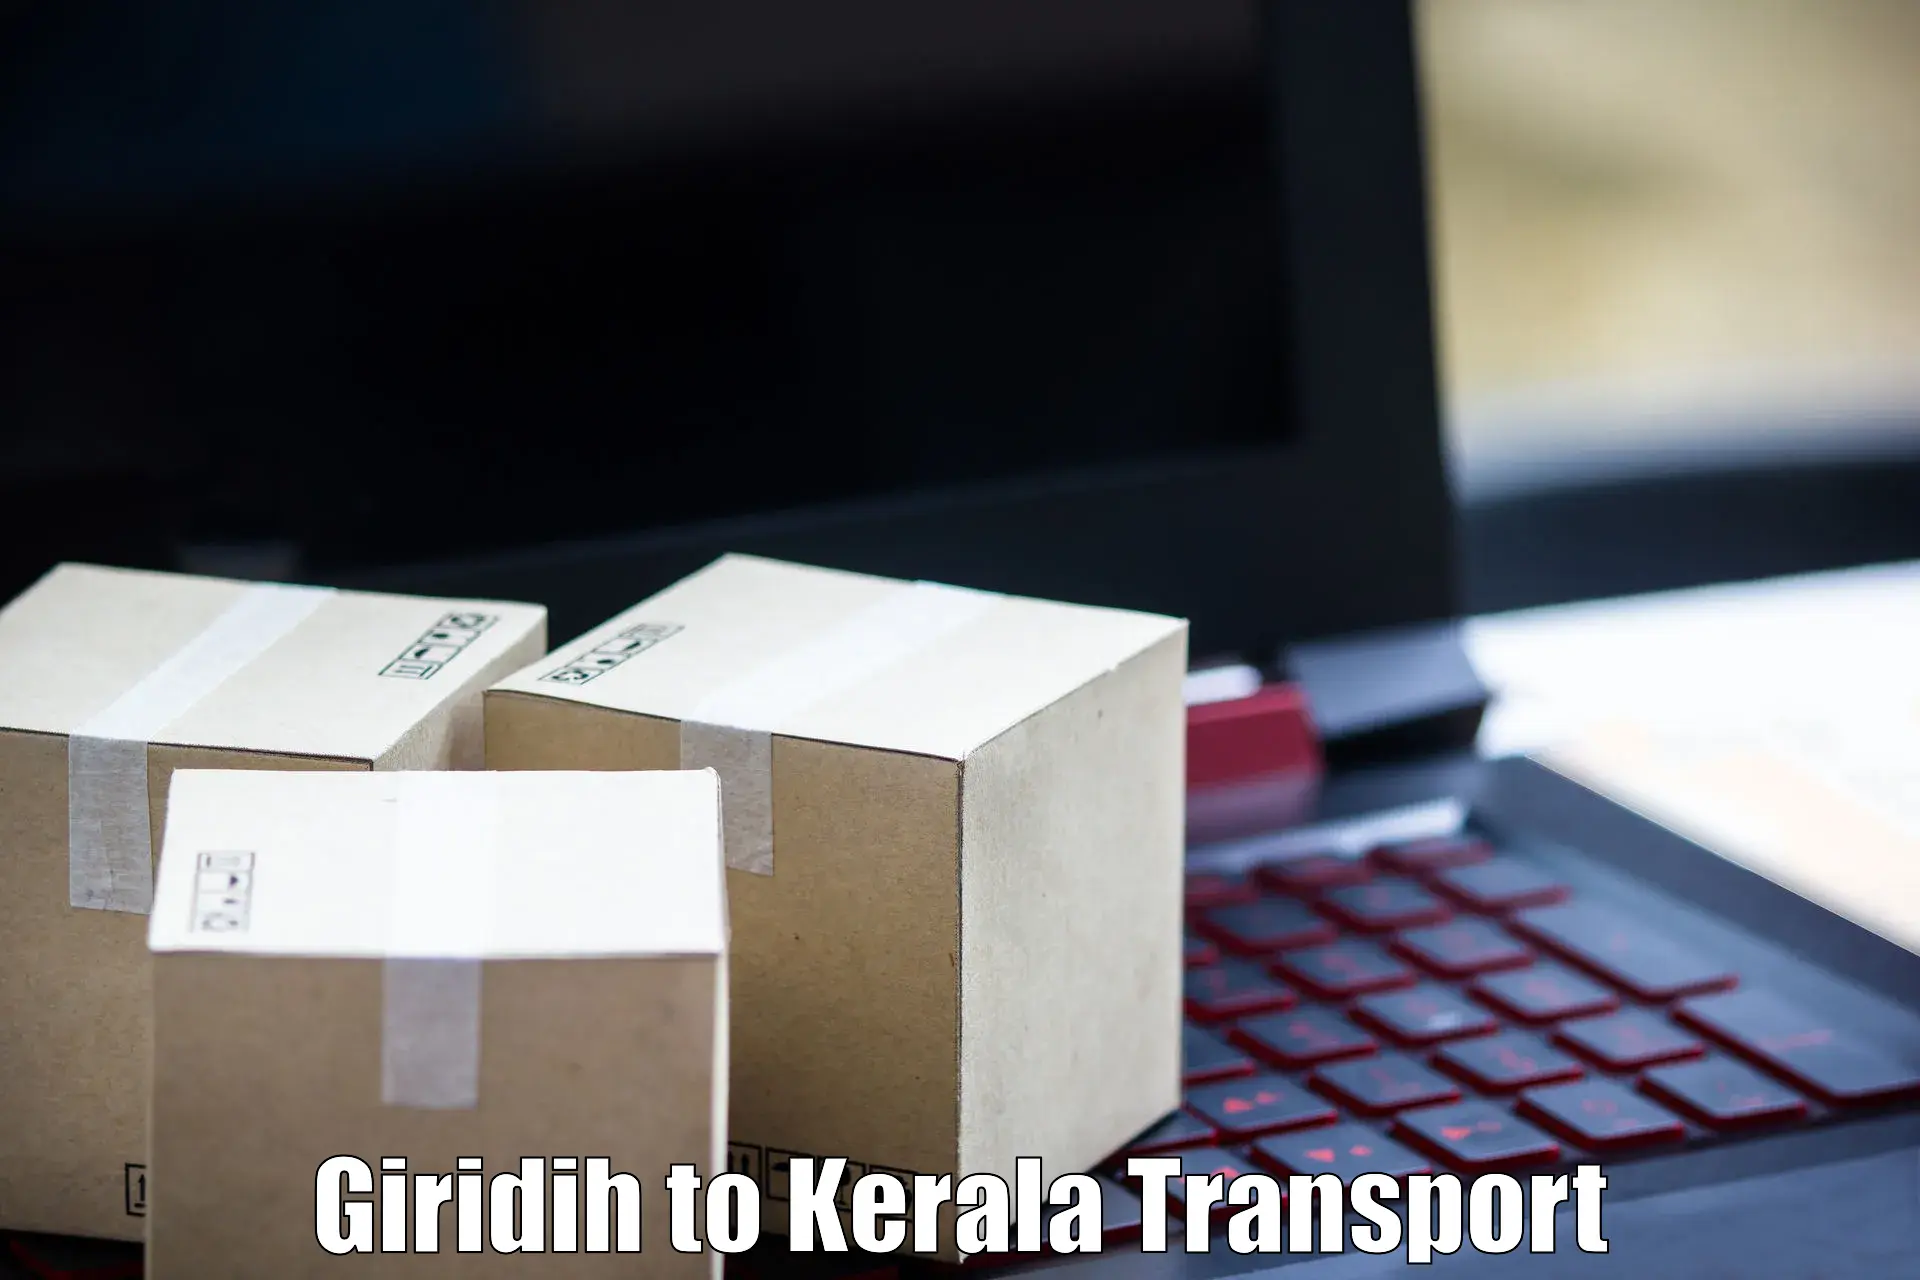 Road transport online services Giridih to Chavassery